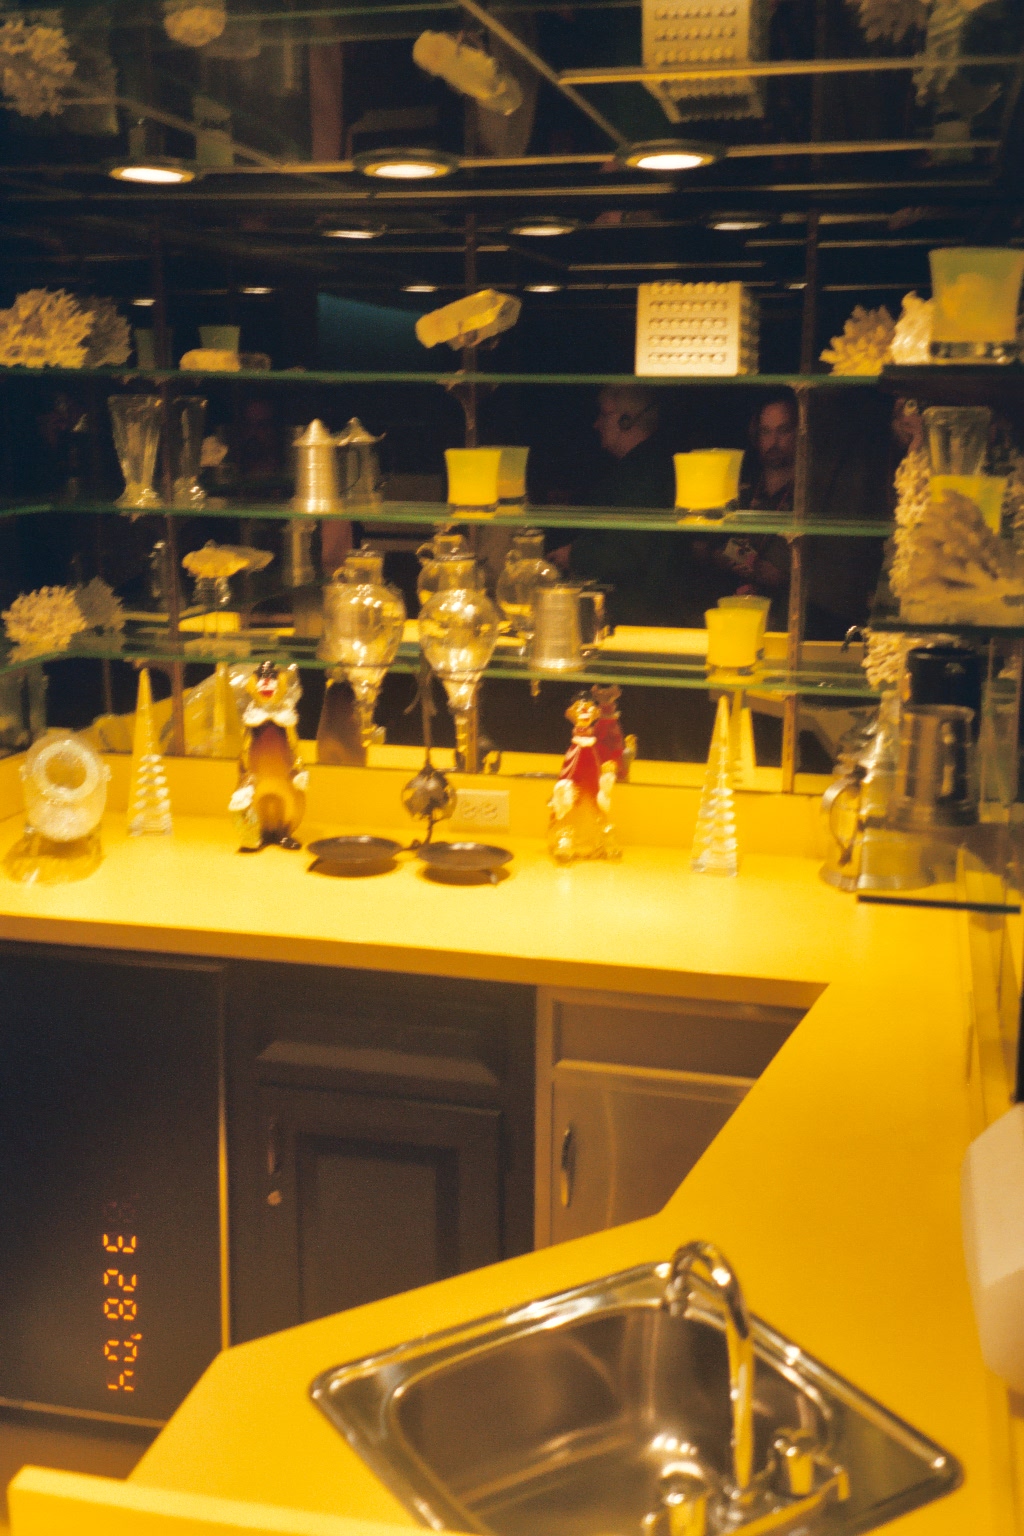 yellow painted kitchen area with shelves full of glass objects and decorations